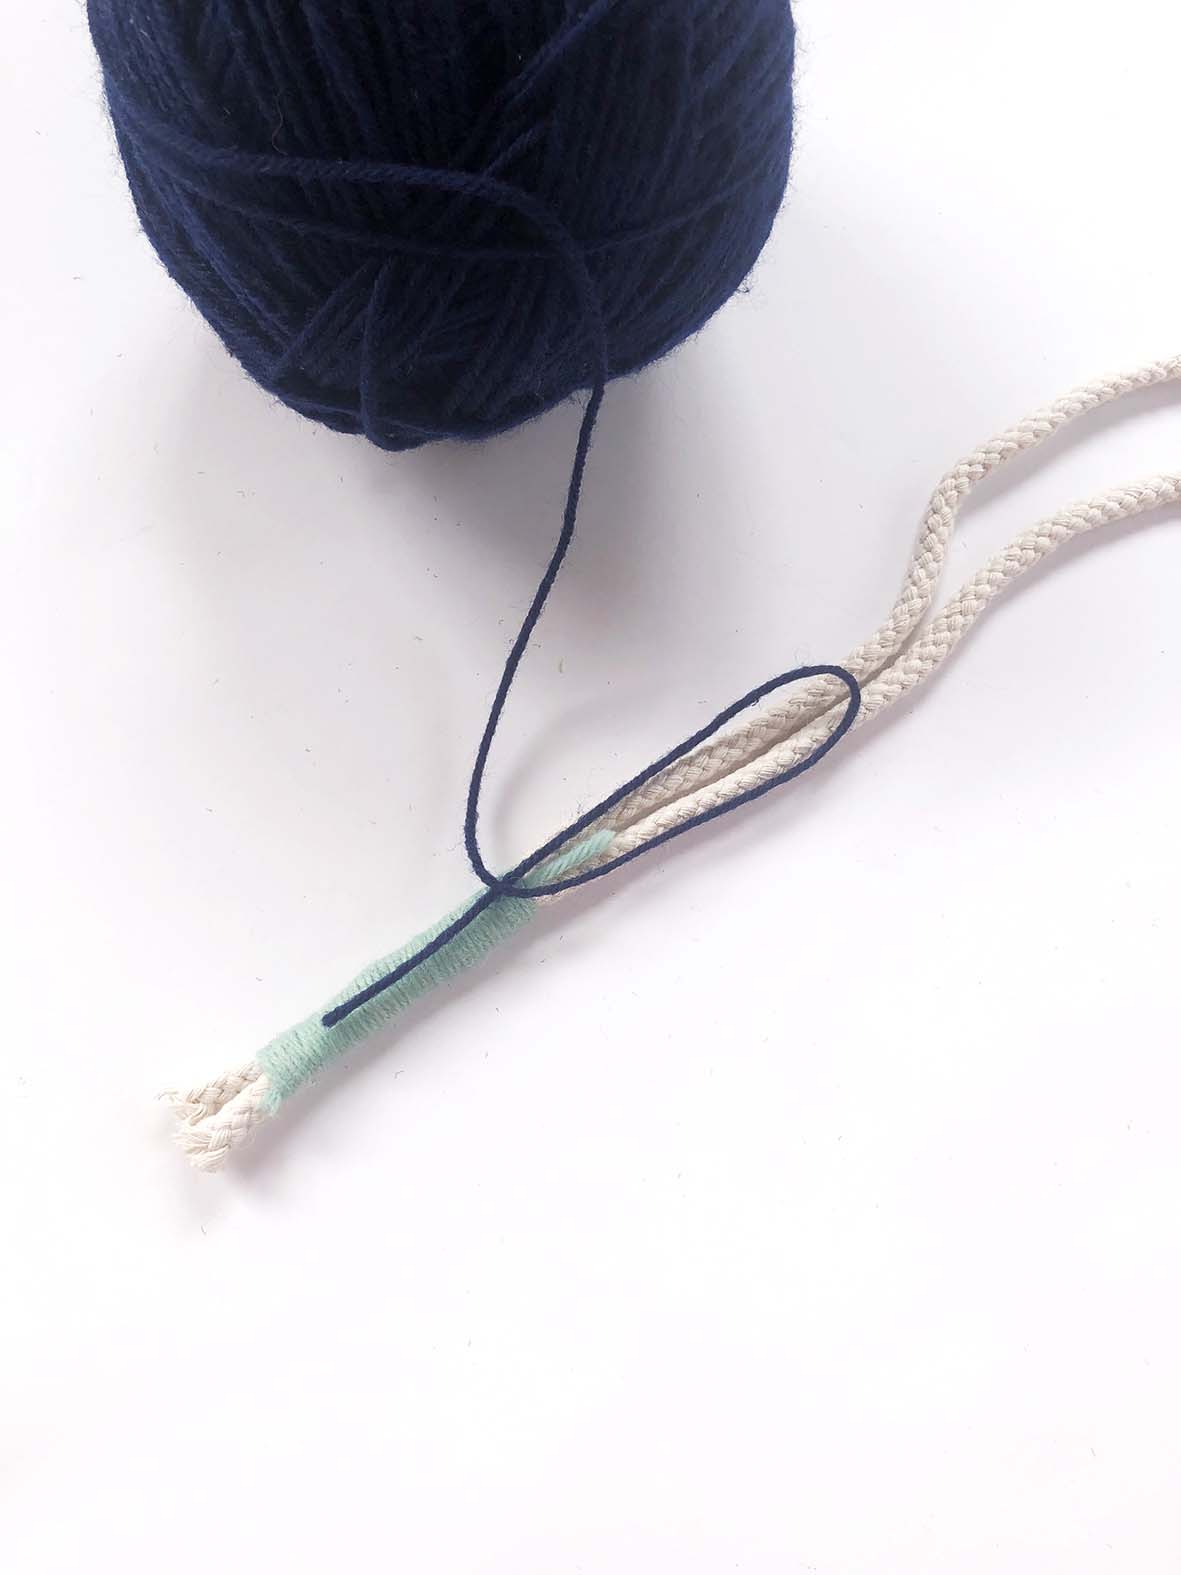 Two cords wrapped together with wool